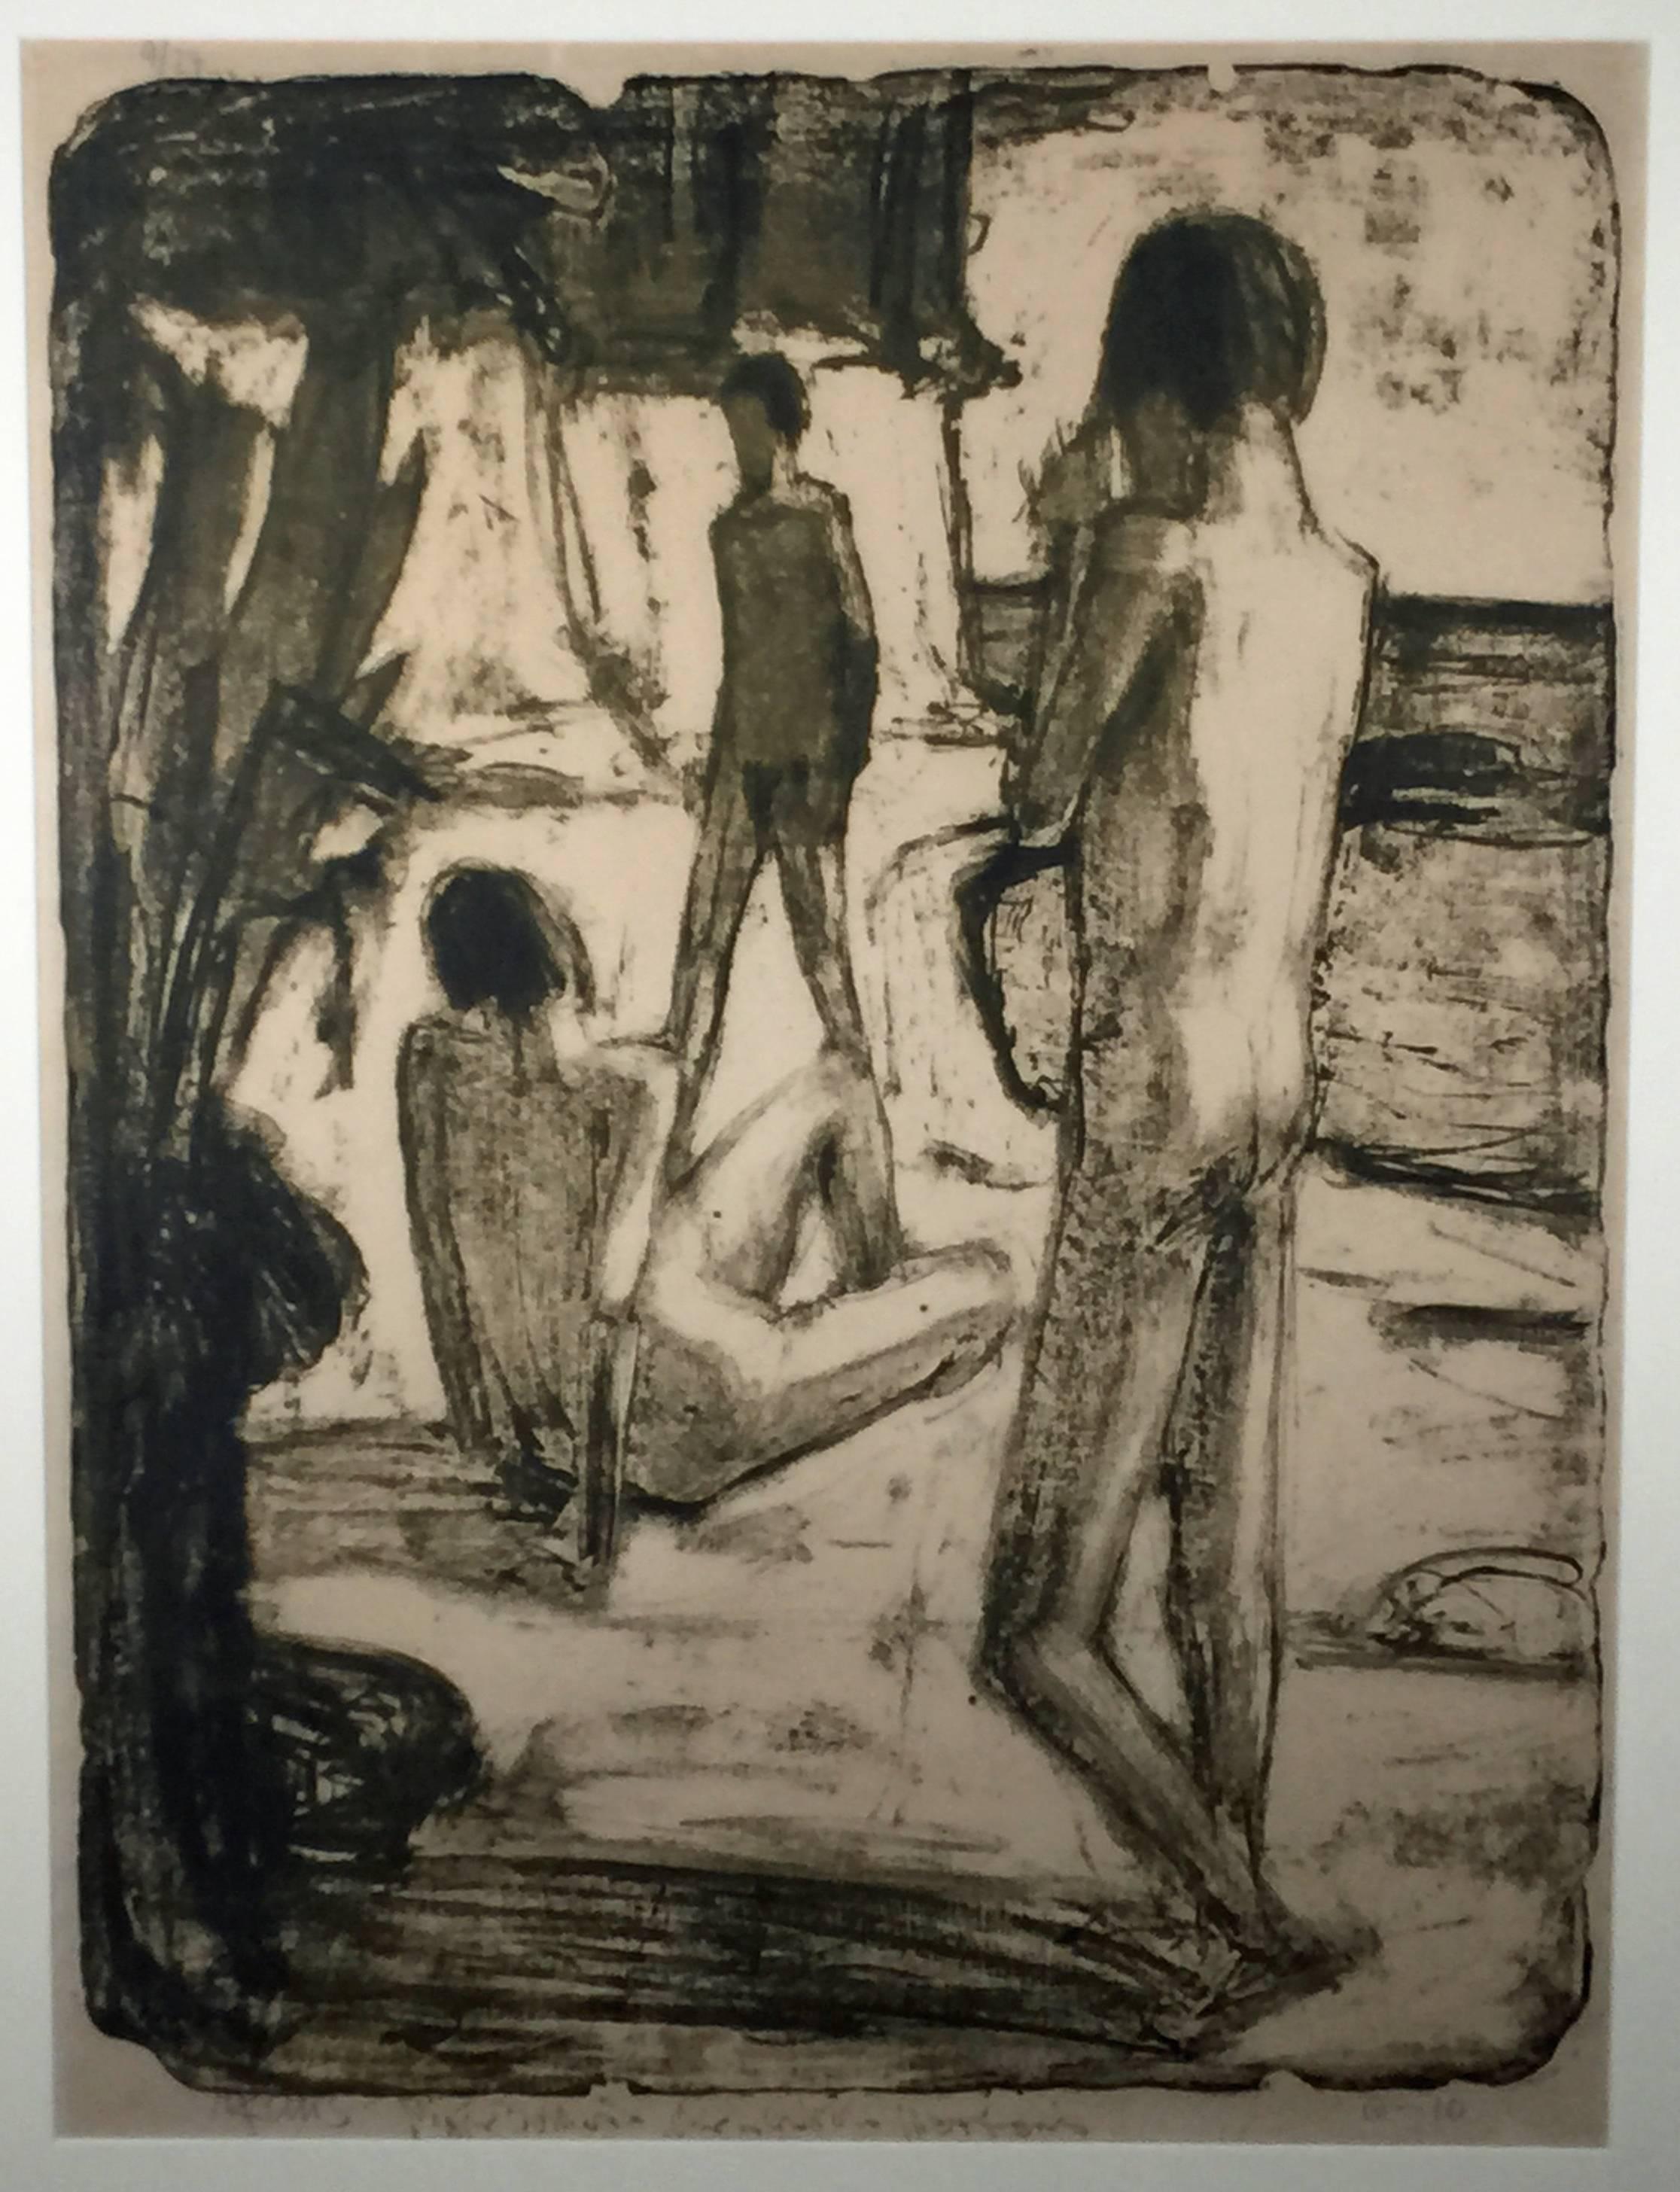 BADENDE MANNER: (THREE MALE BATHERS AT THE SHORE)